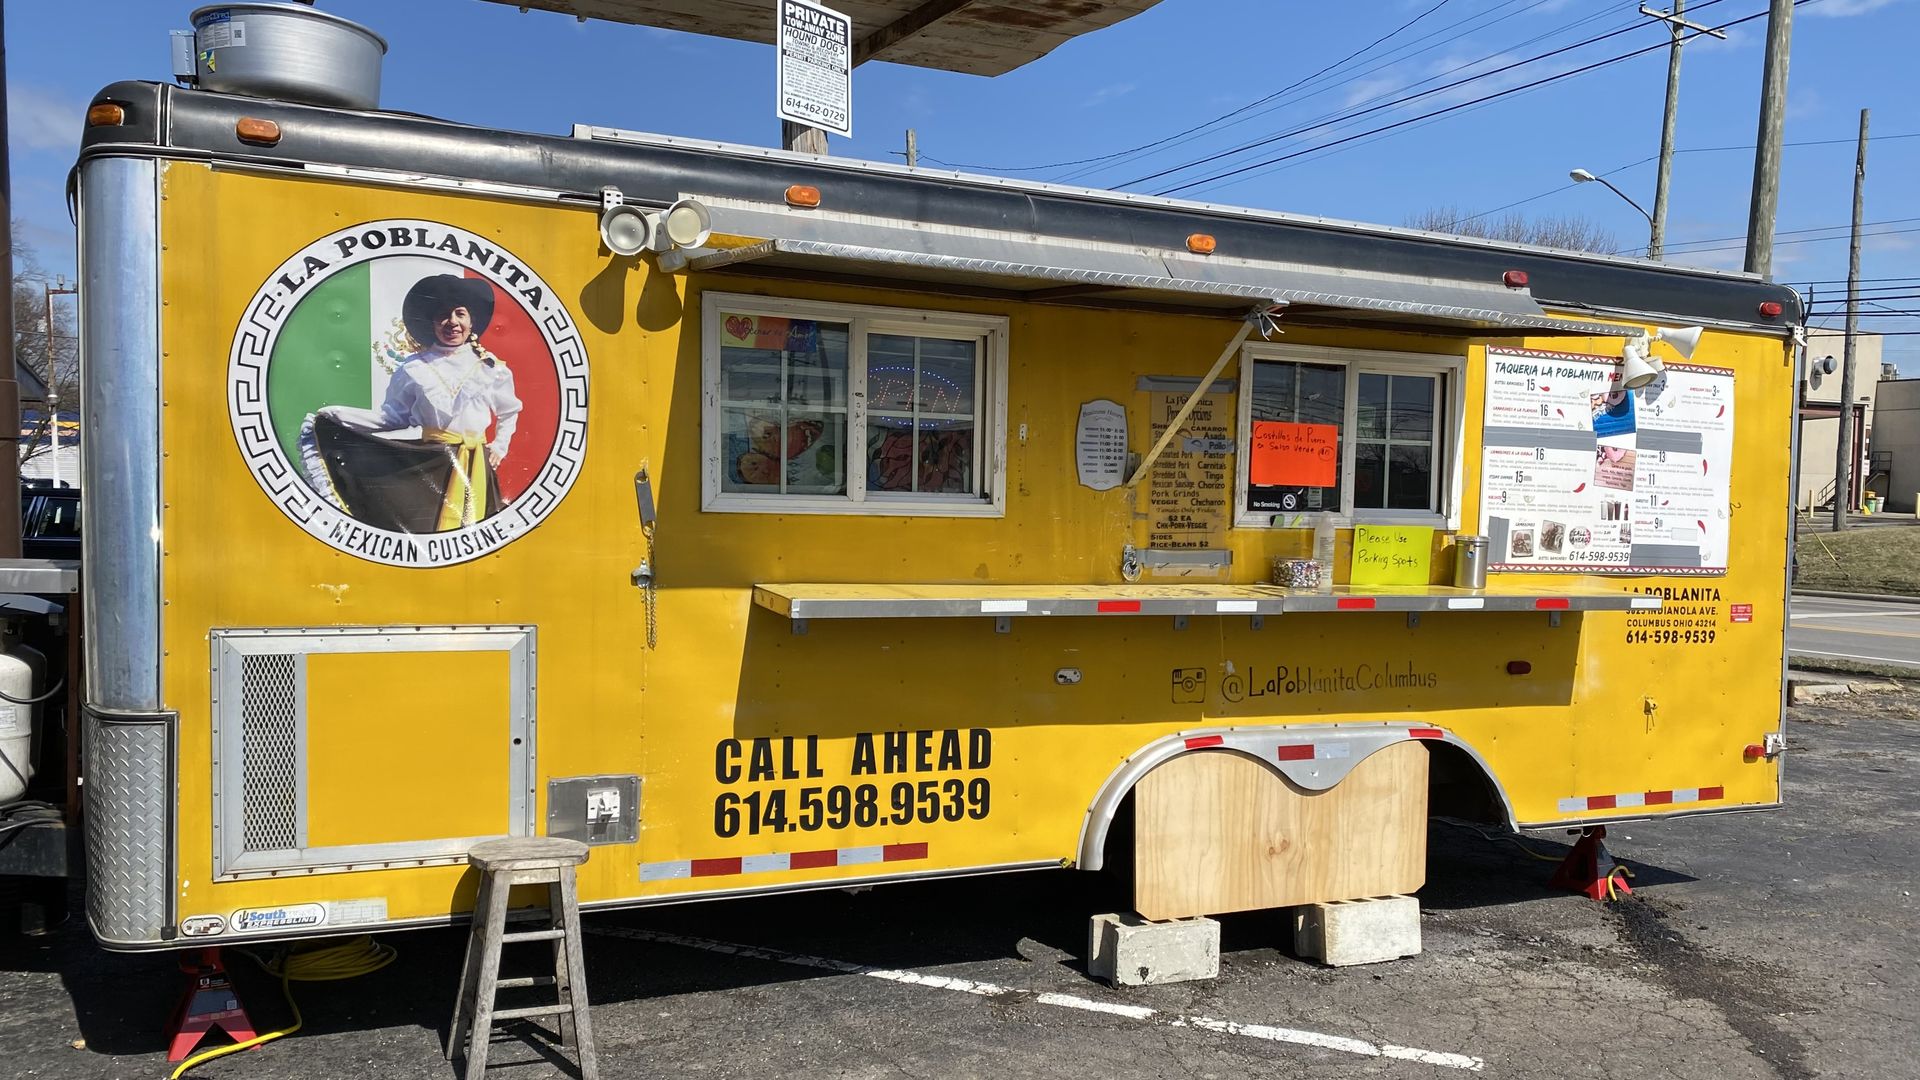 A yellow food truck with the La Poblanita logo on it